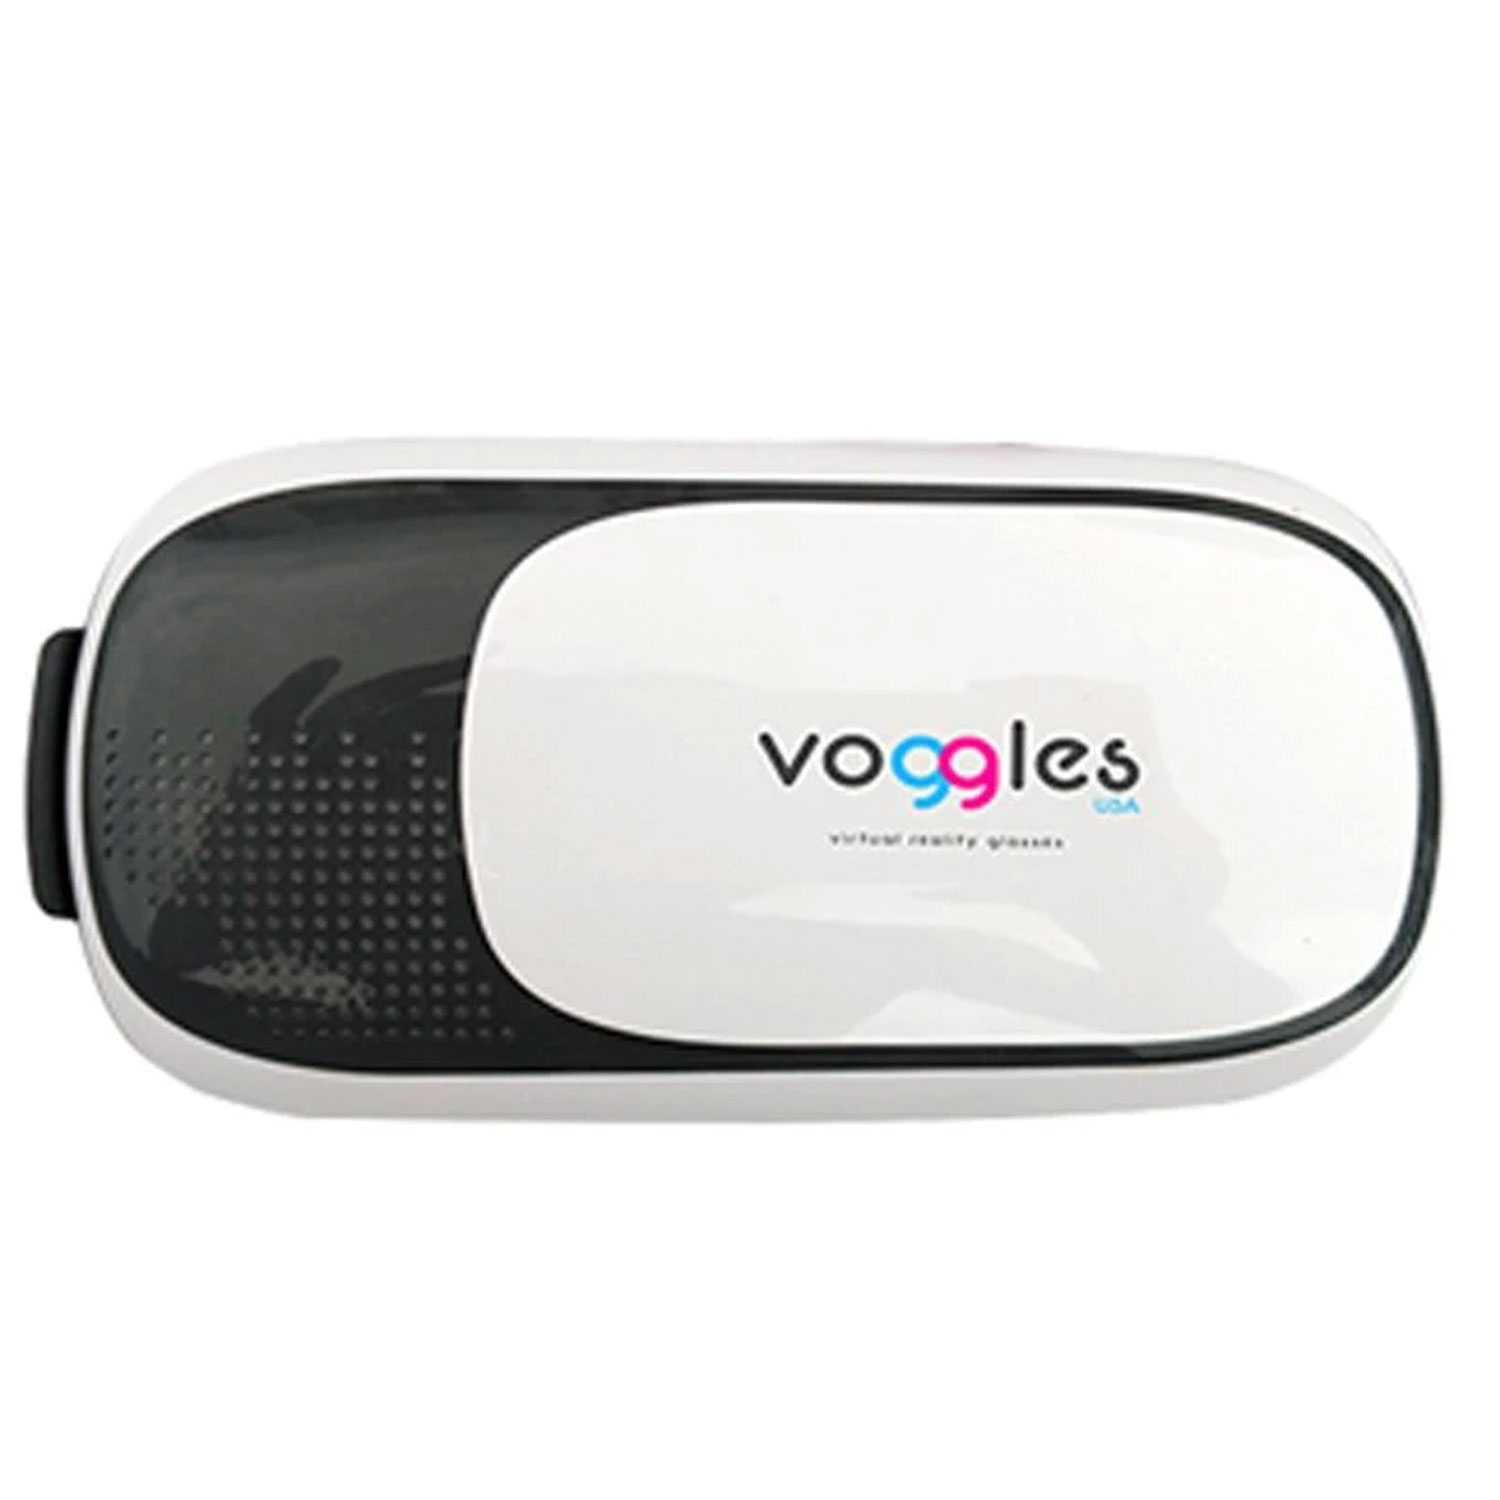 Voggles 3D VR Virtual Reality Headset